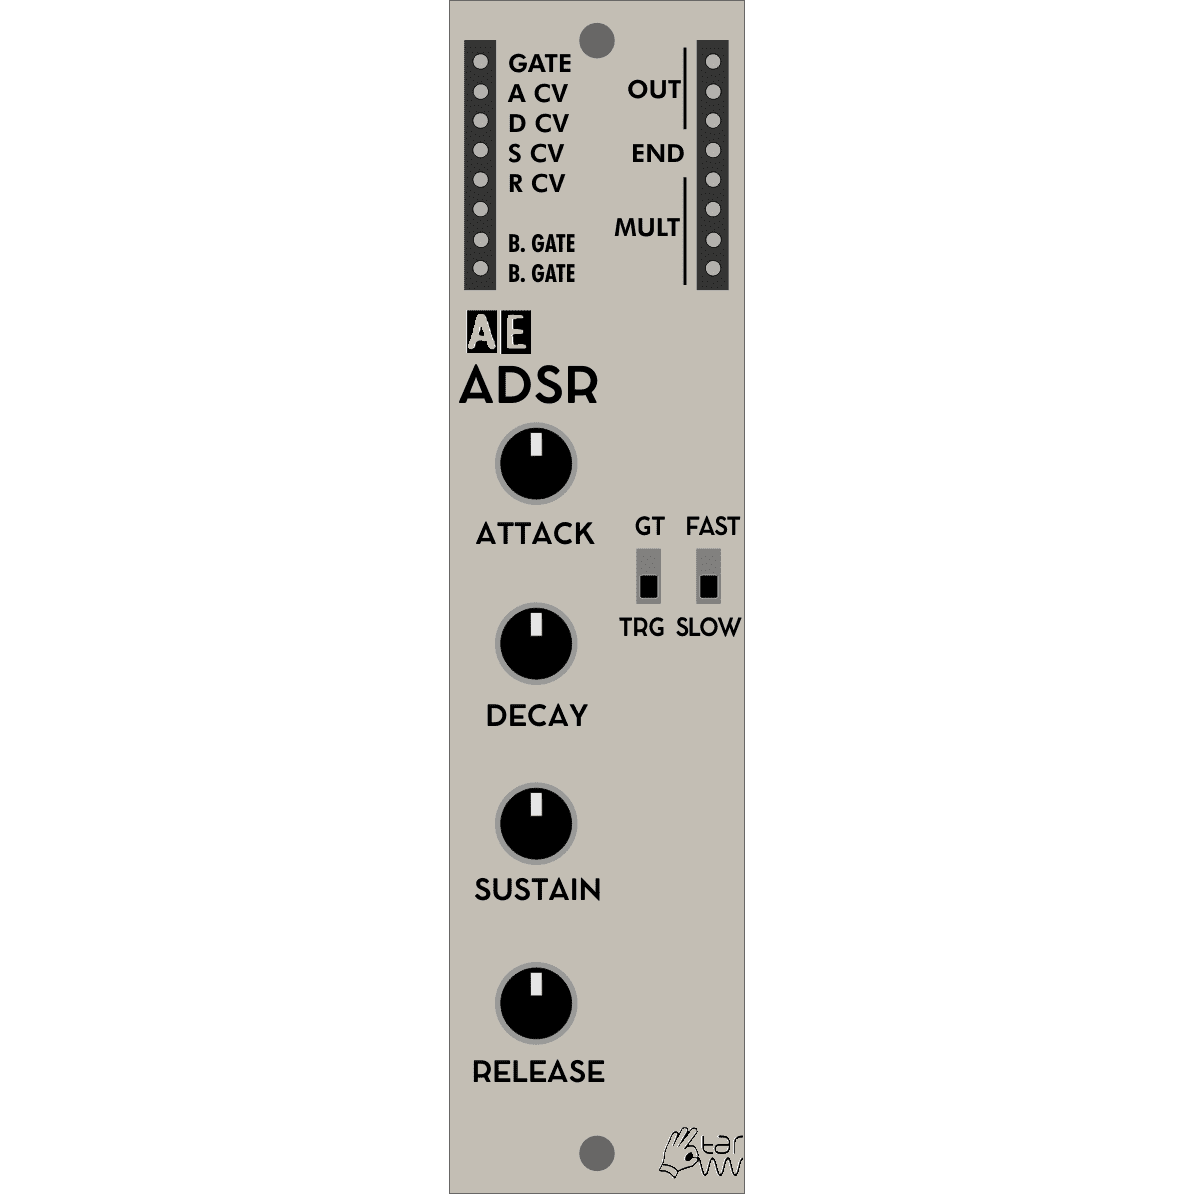 ADSR Module a Classic Envelope with CV control for all Parameter for AE Modular 1